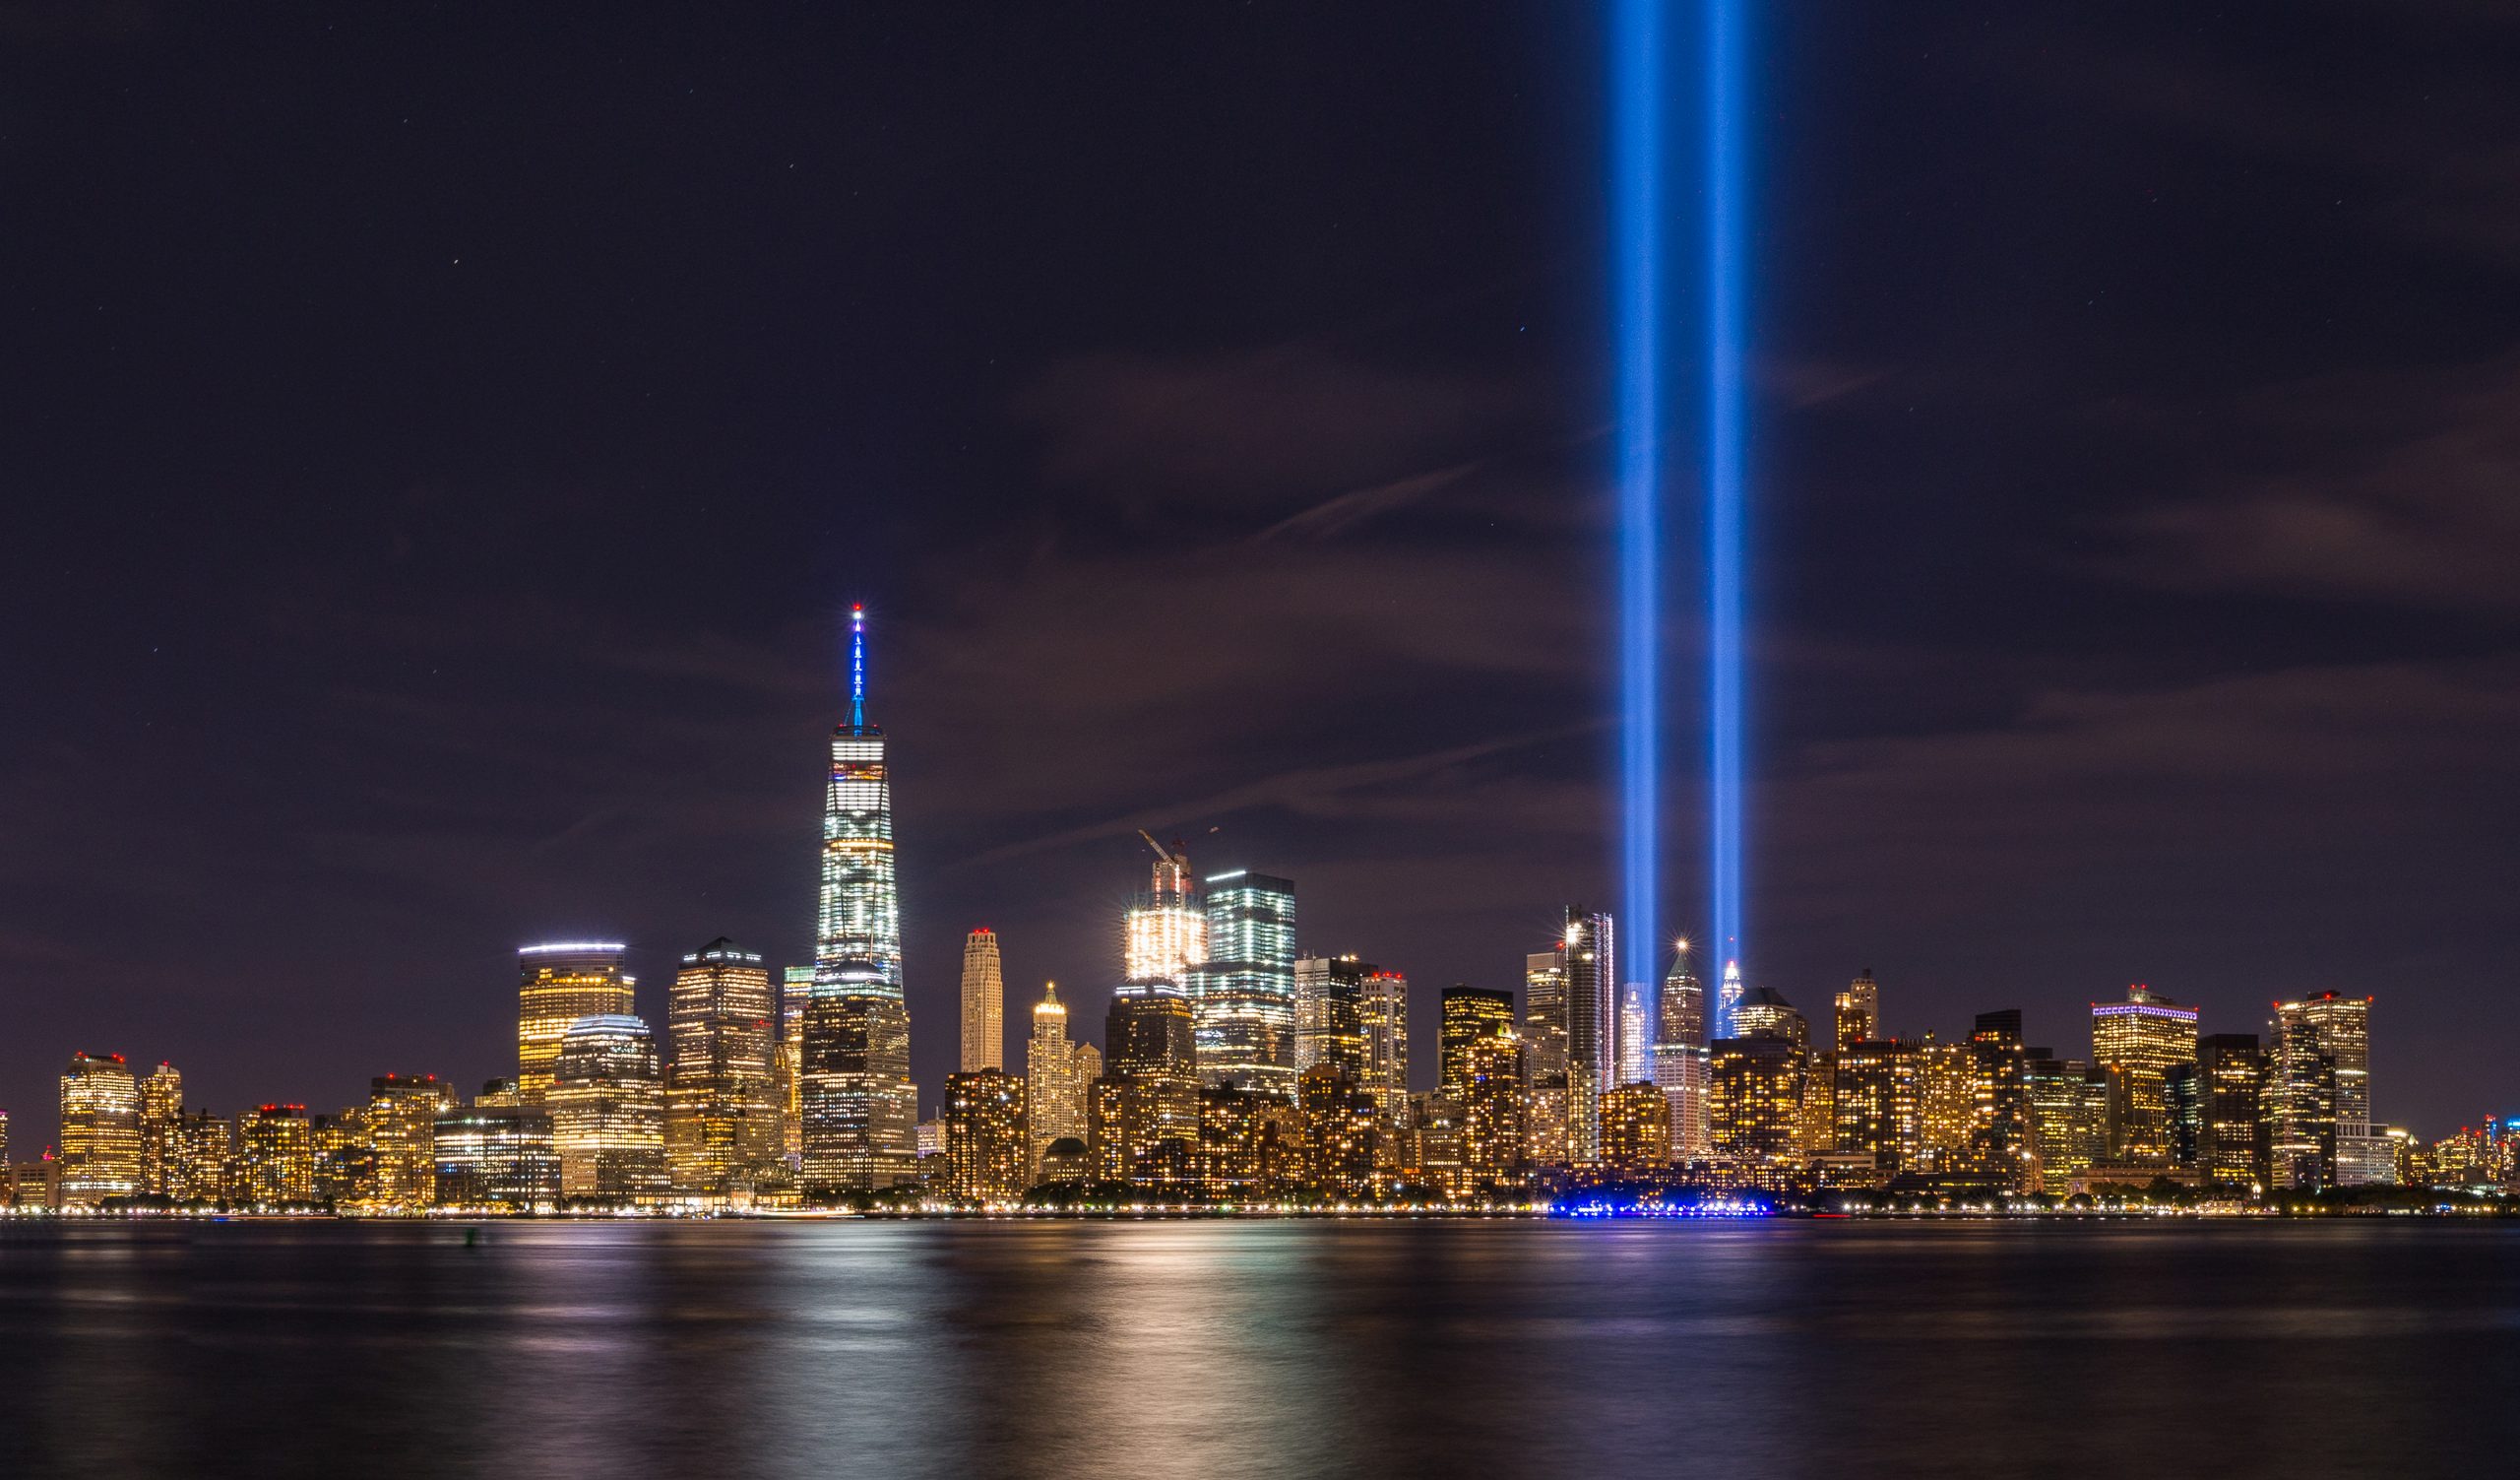 Darkness 9/11: Tribute in Light cancellation adds to more somber tone 2020 commemoration | amNewYork